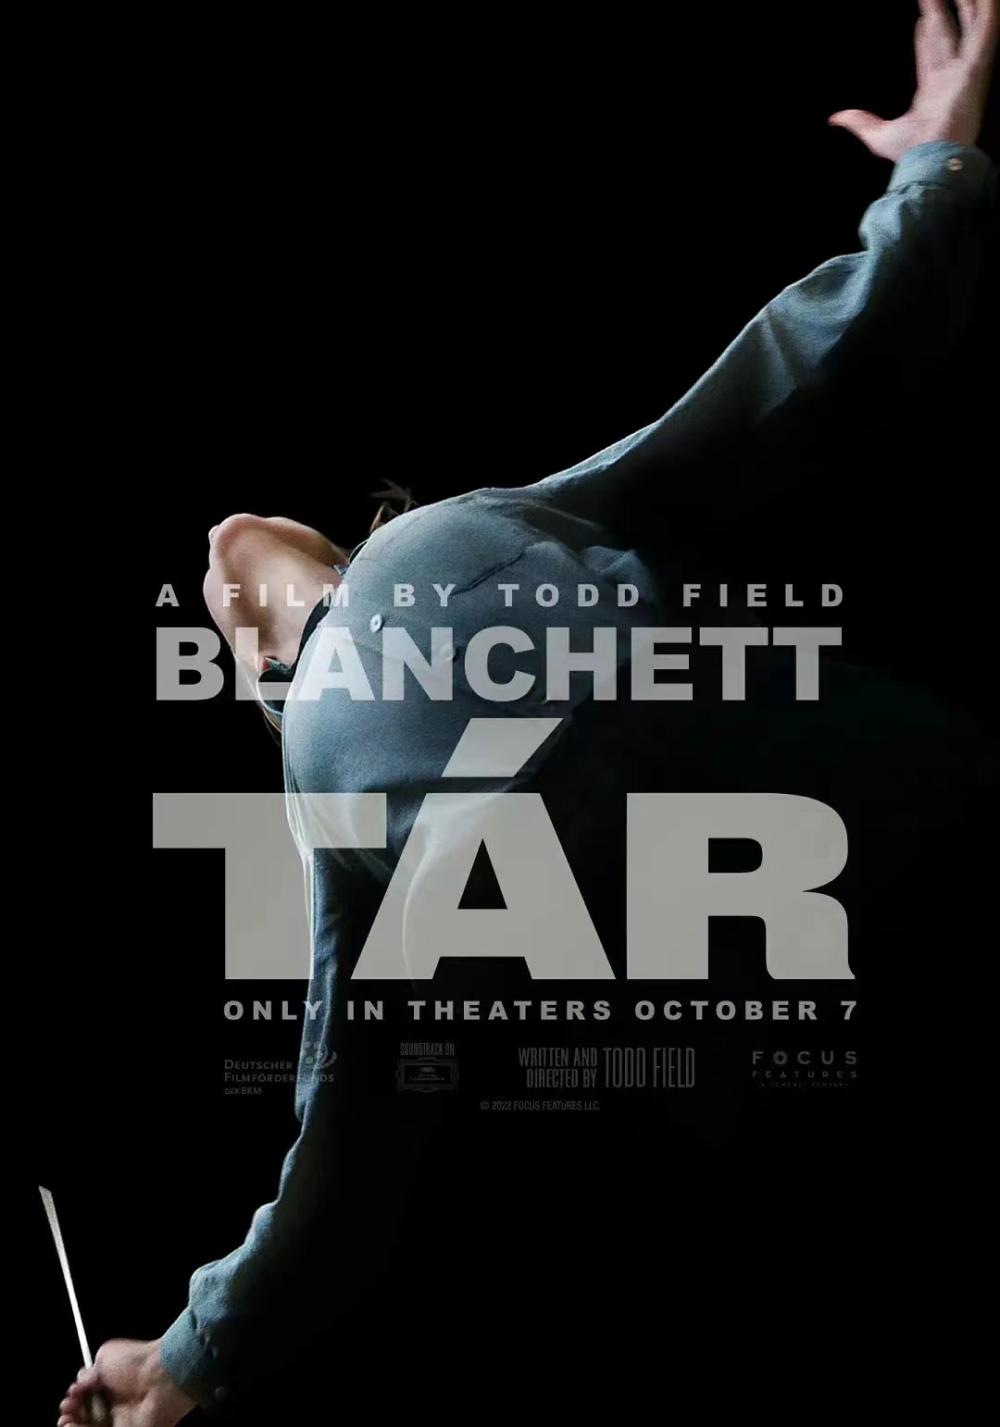 Why did Kate Blanchett mention this Chinese conductor?, Global | Records | Kate Blanchett in the movie "Tall"